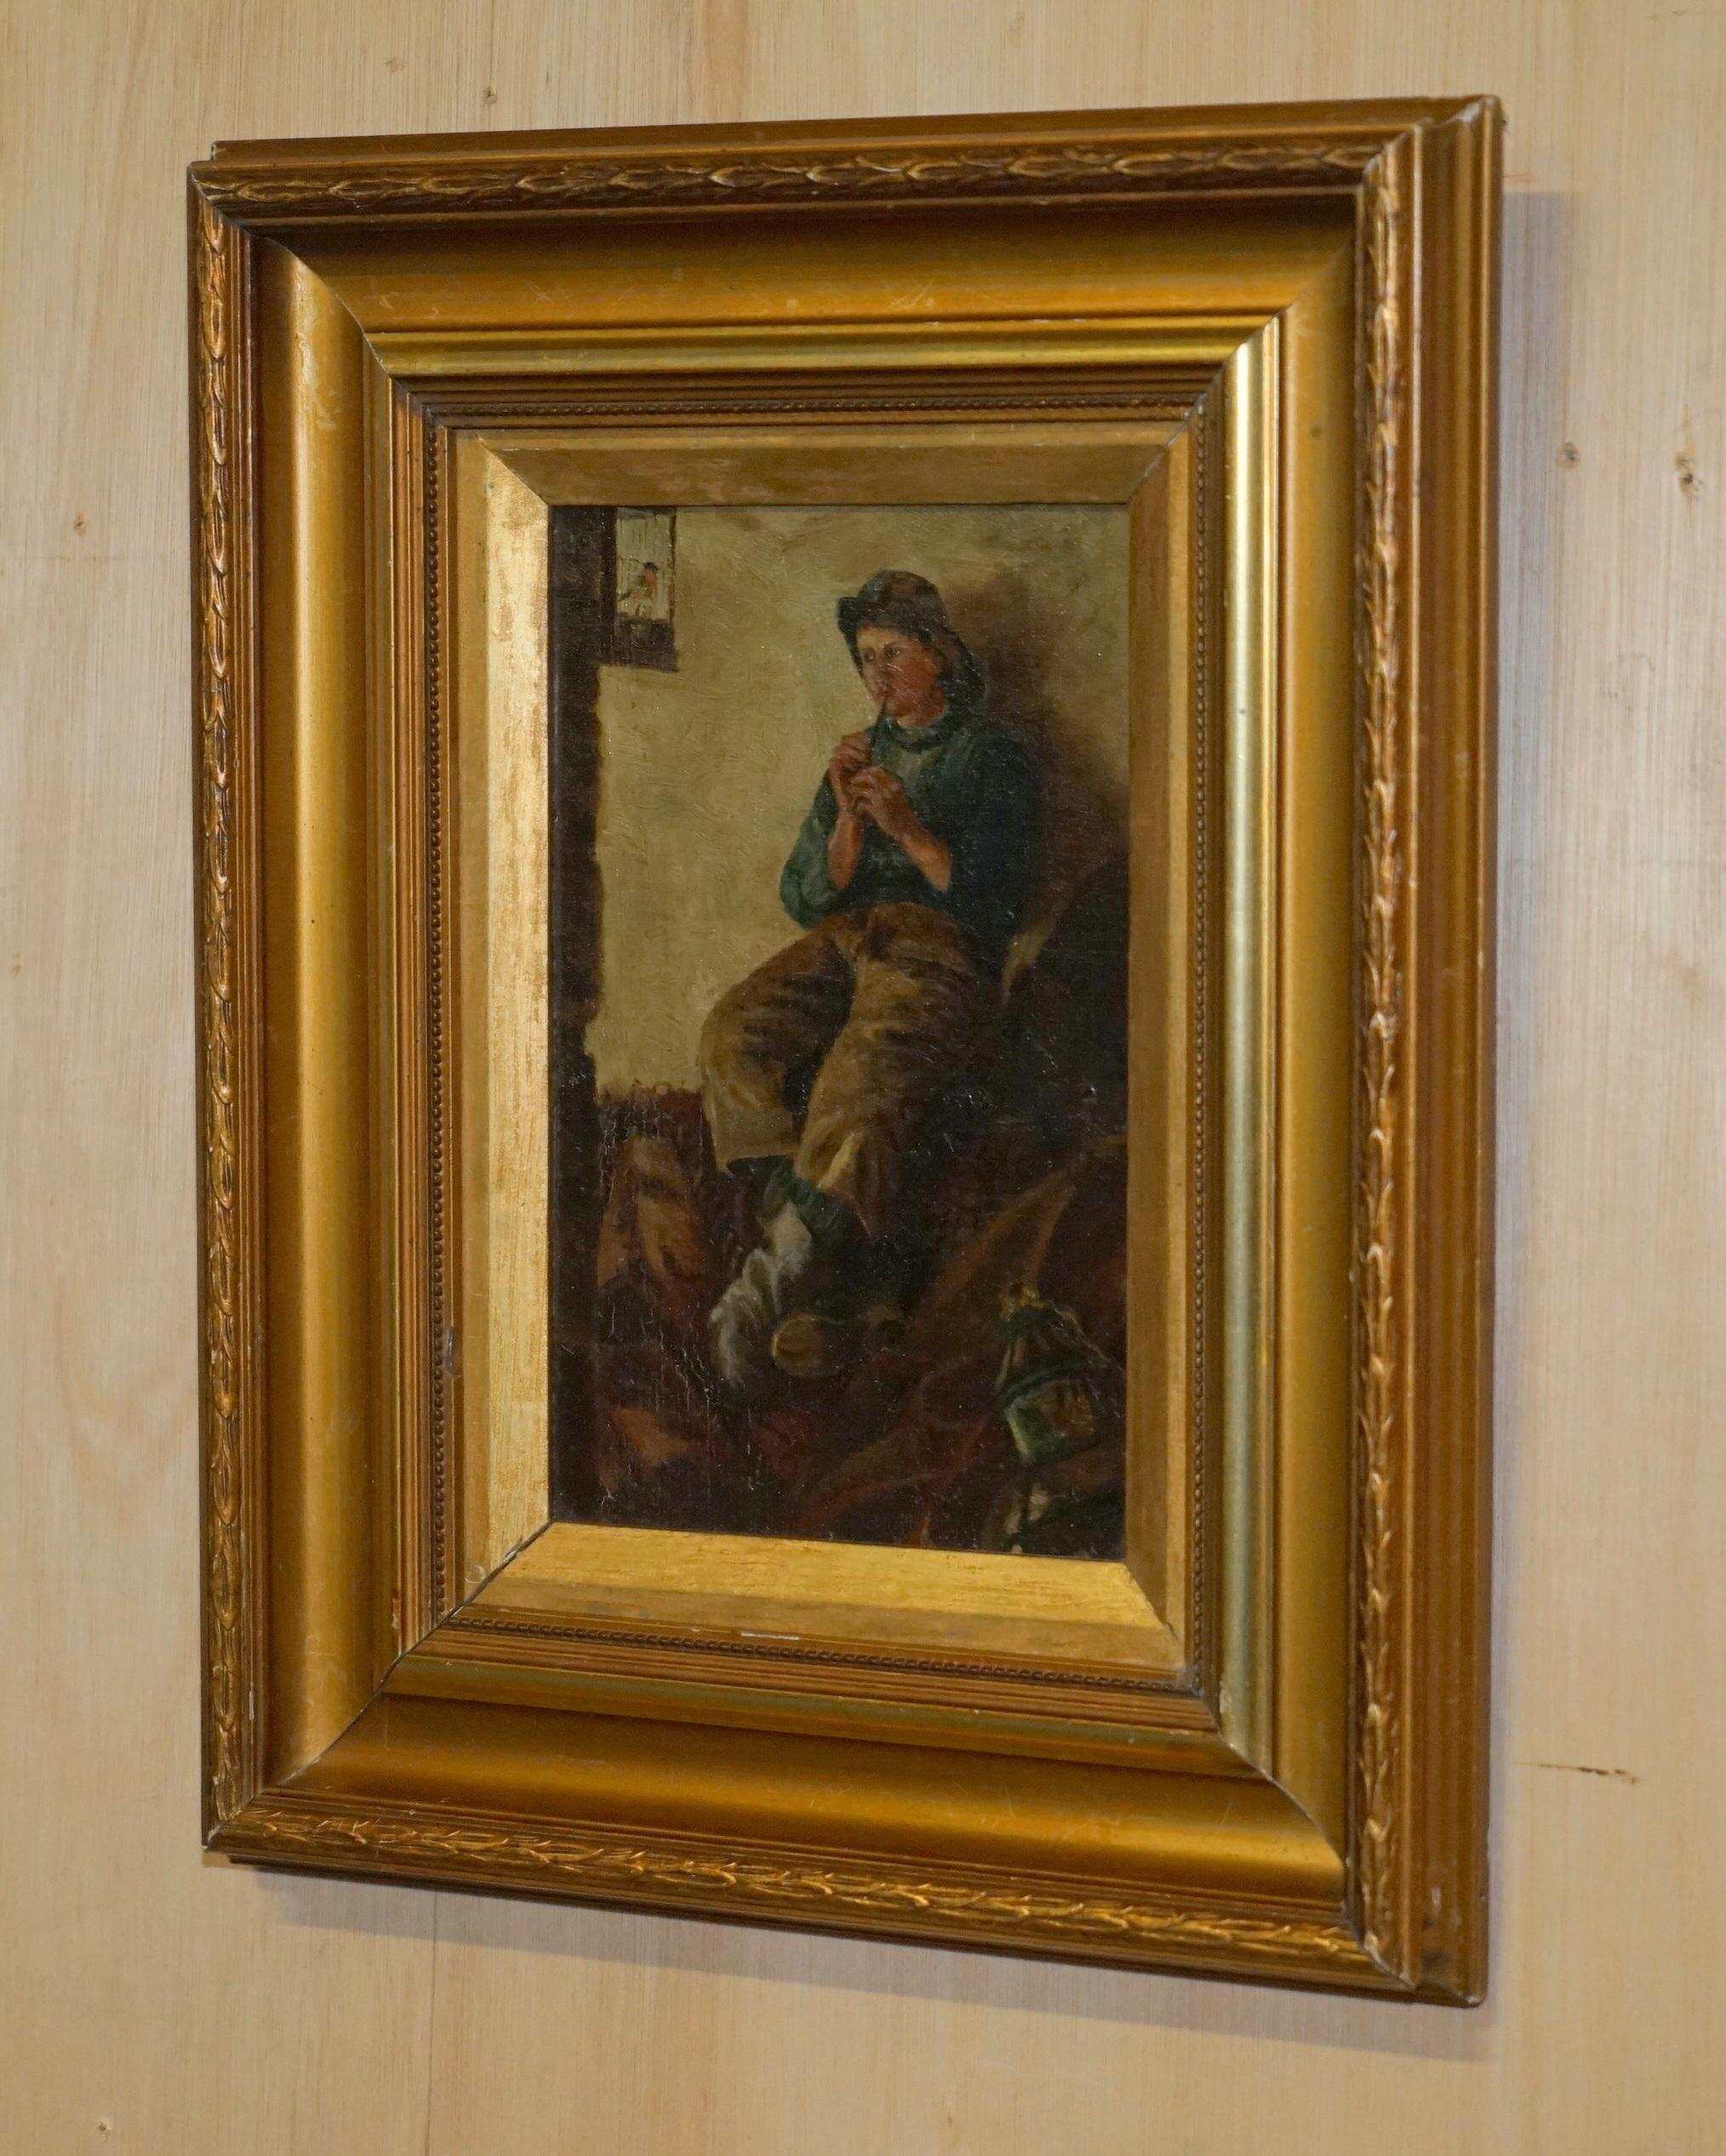 Royal House Antiques

We are delighted to offer for sale this stunning original circa 1880 oil painting of a young lad playing a pipe, most likely a Cornish Fisherman 

A very good looking and wonderfully executed painting, its a relatively well